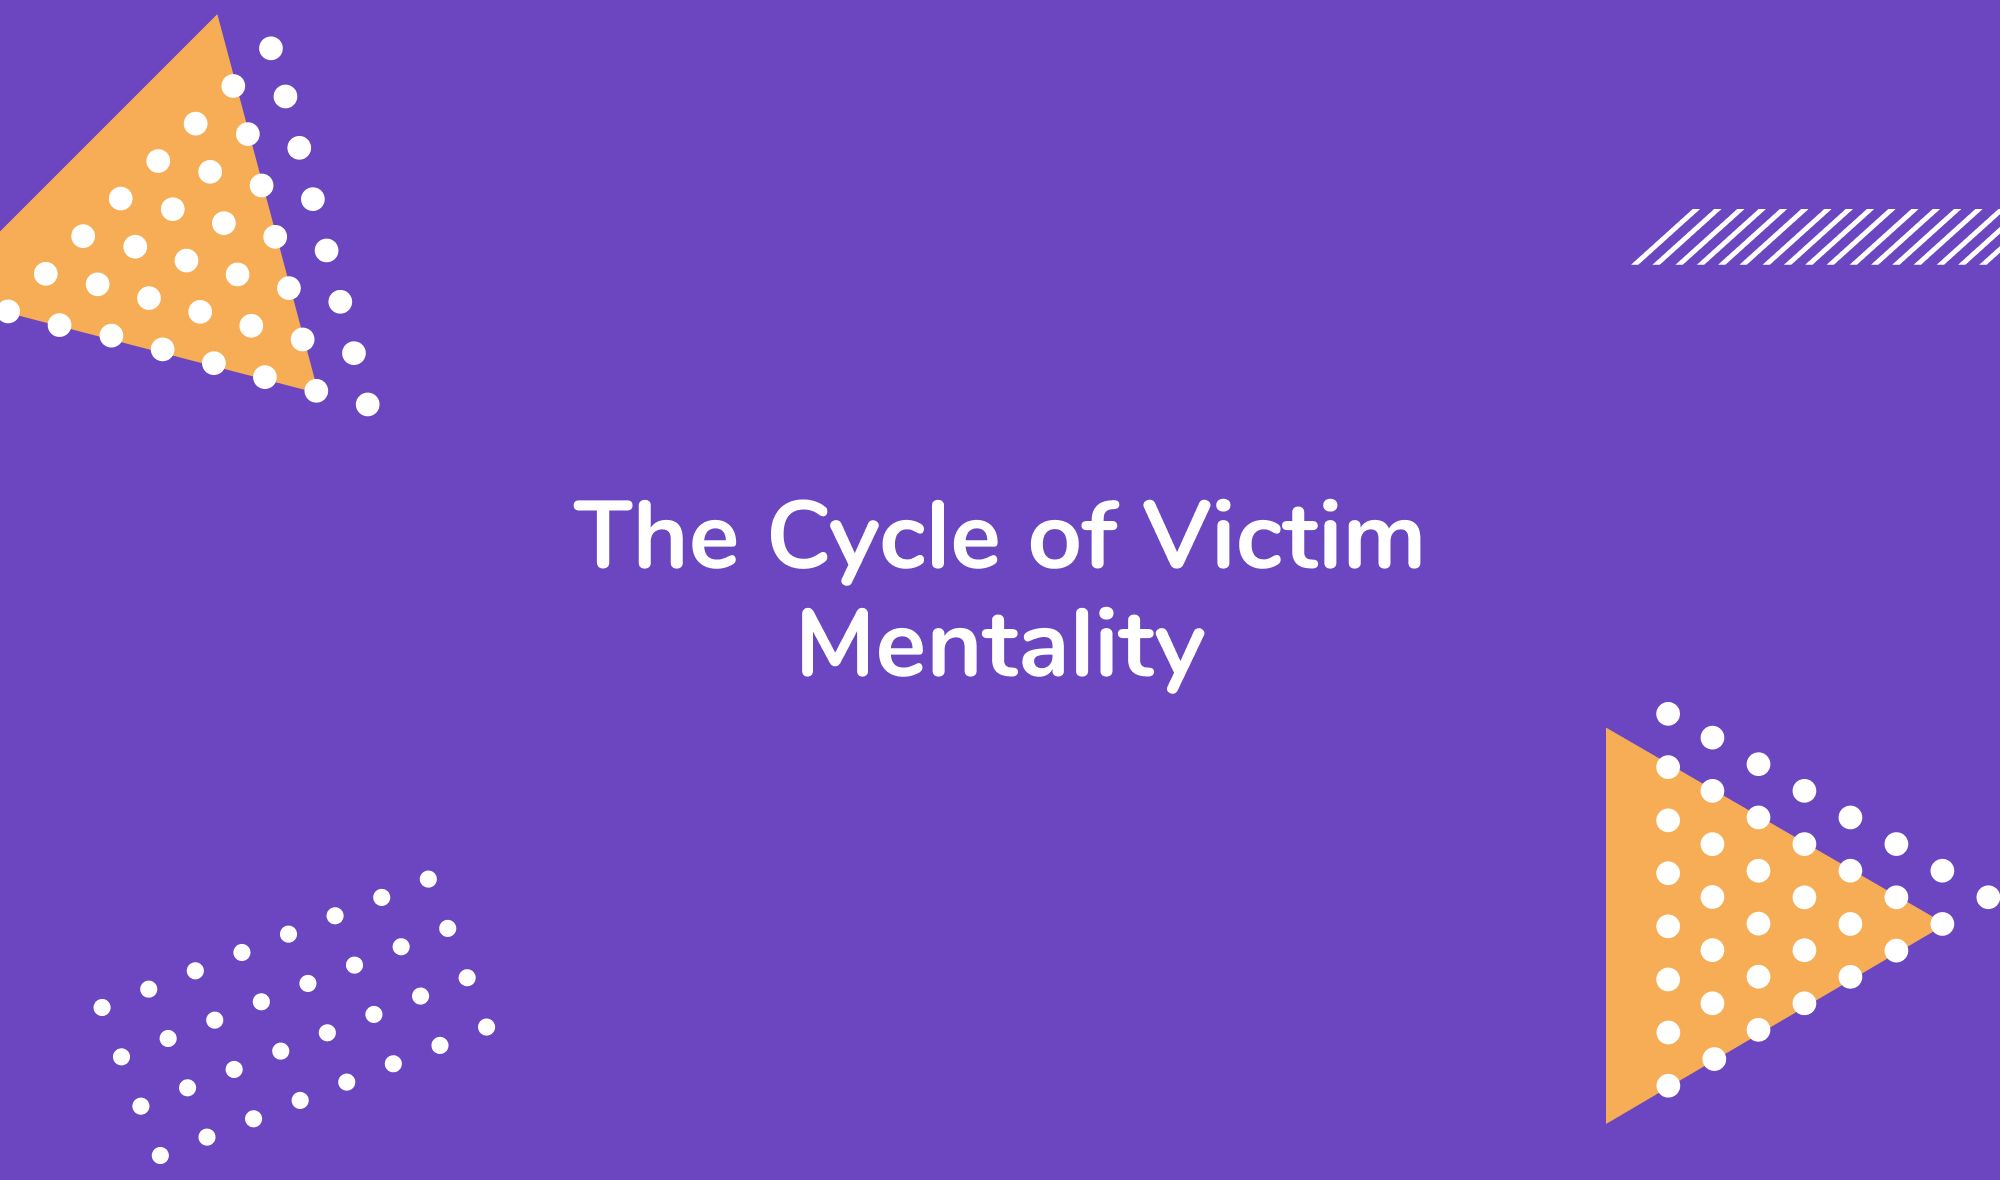 The Cycle of Victim Mentality